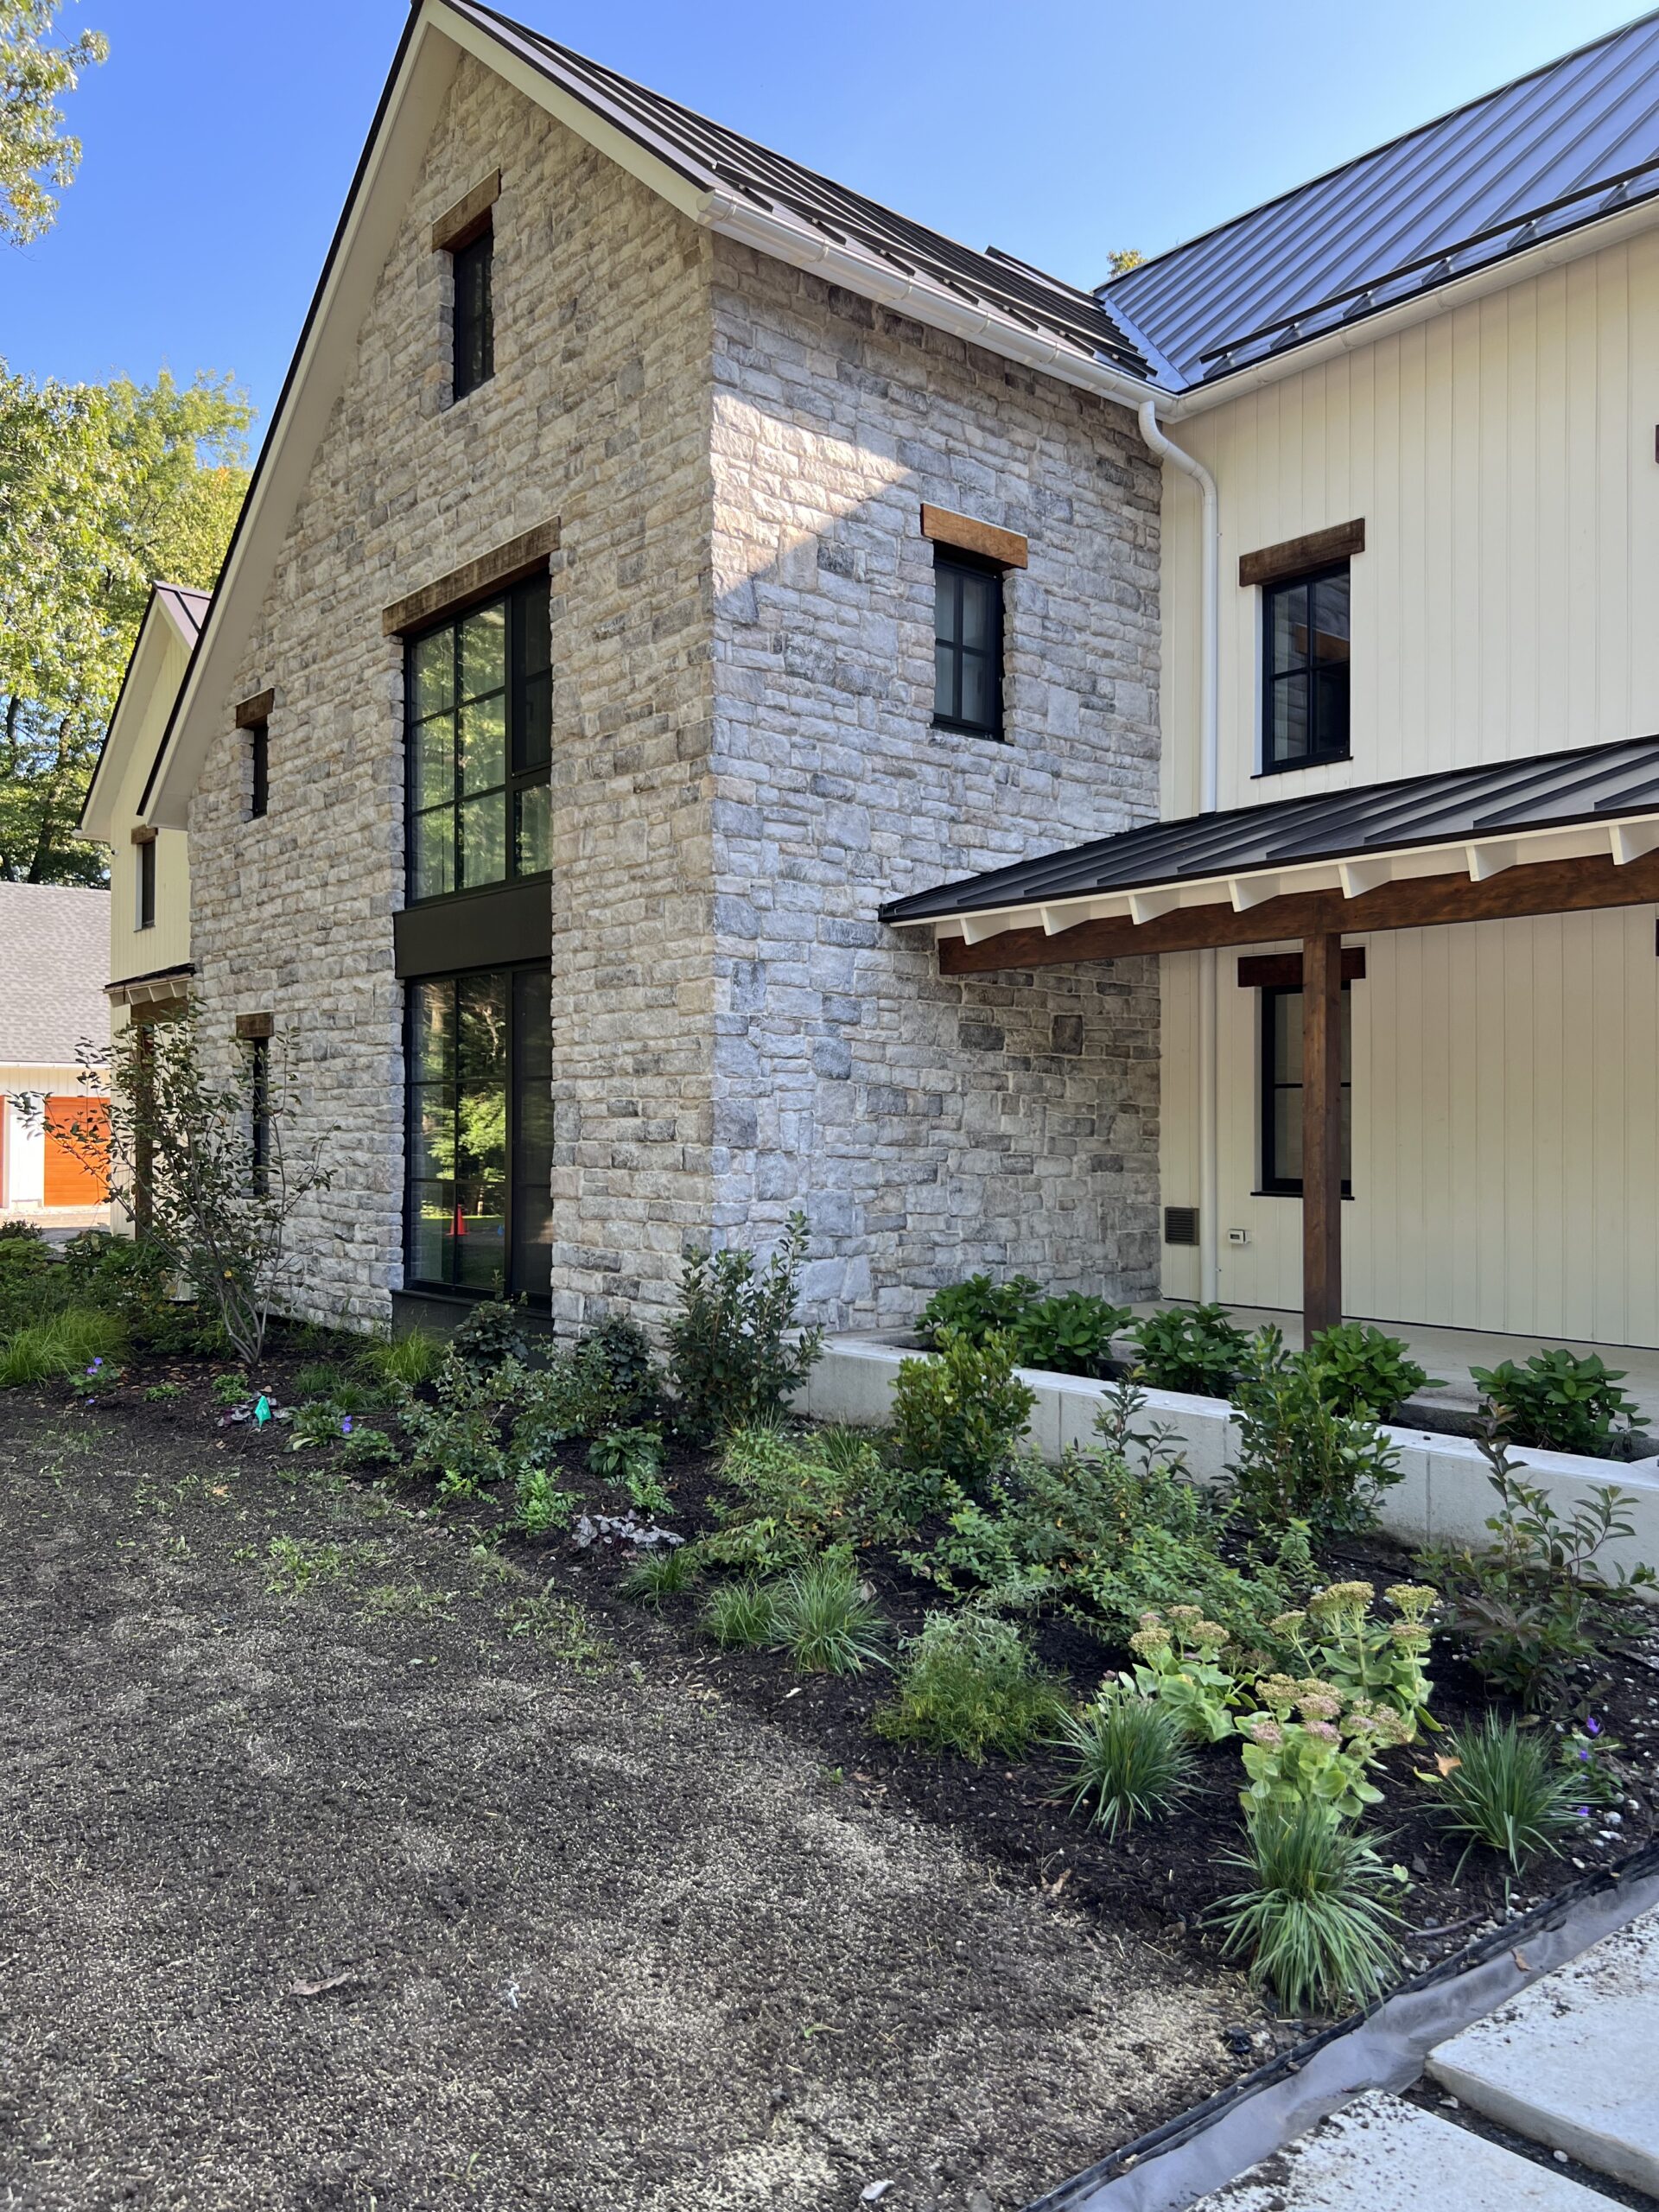 Front foundation planting features native shrubs, perennials and grasses for a layered habitat.